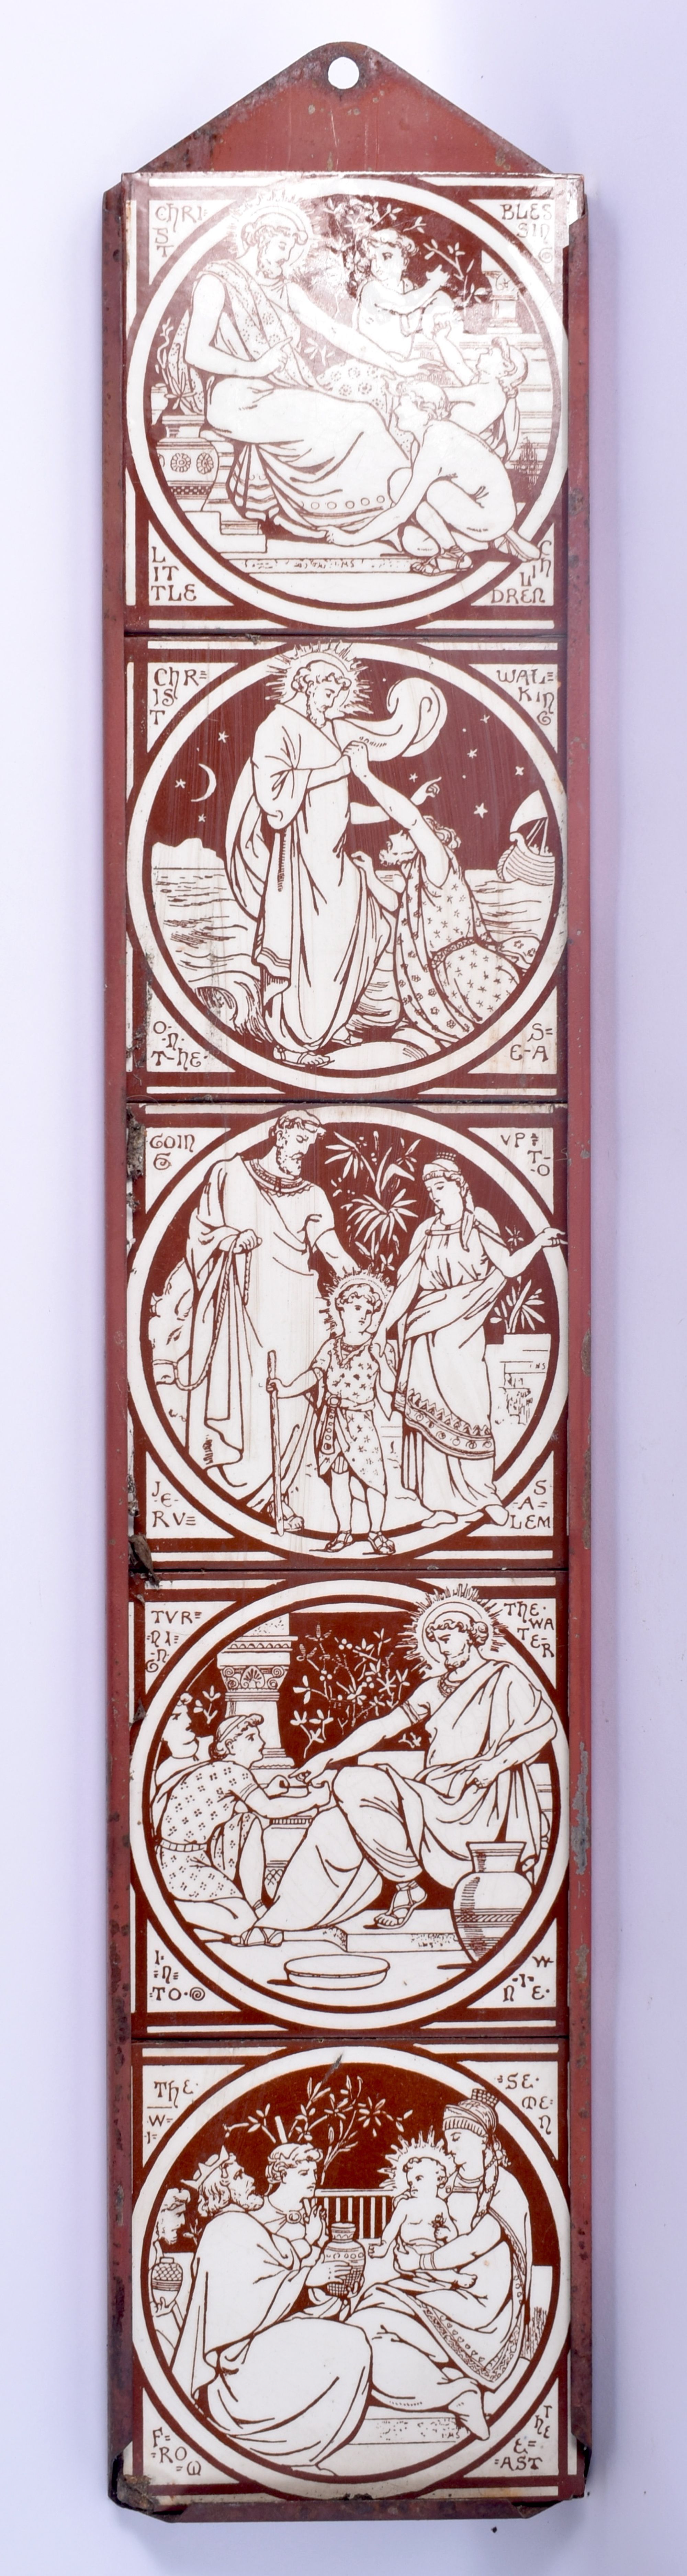 A SET OF ARTS AND CRAFTS MINTON TILES within a metal frame, decorated with figures. Each tile 15 cm